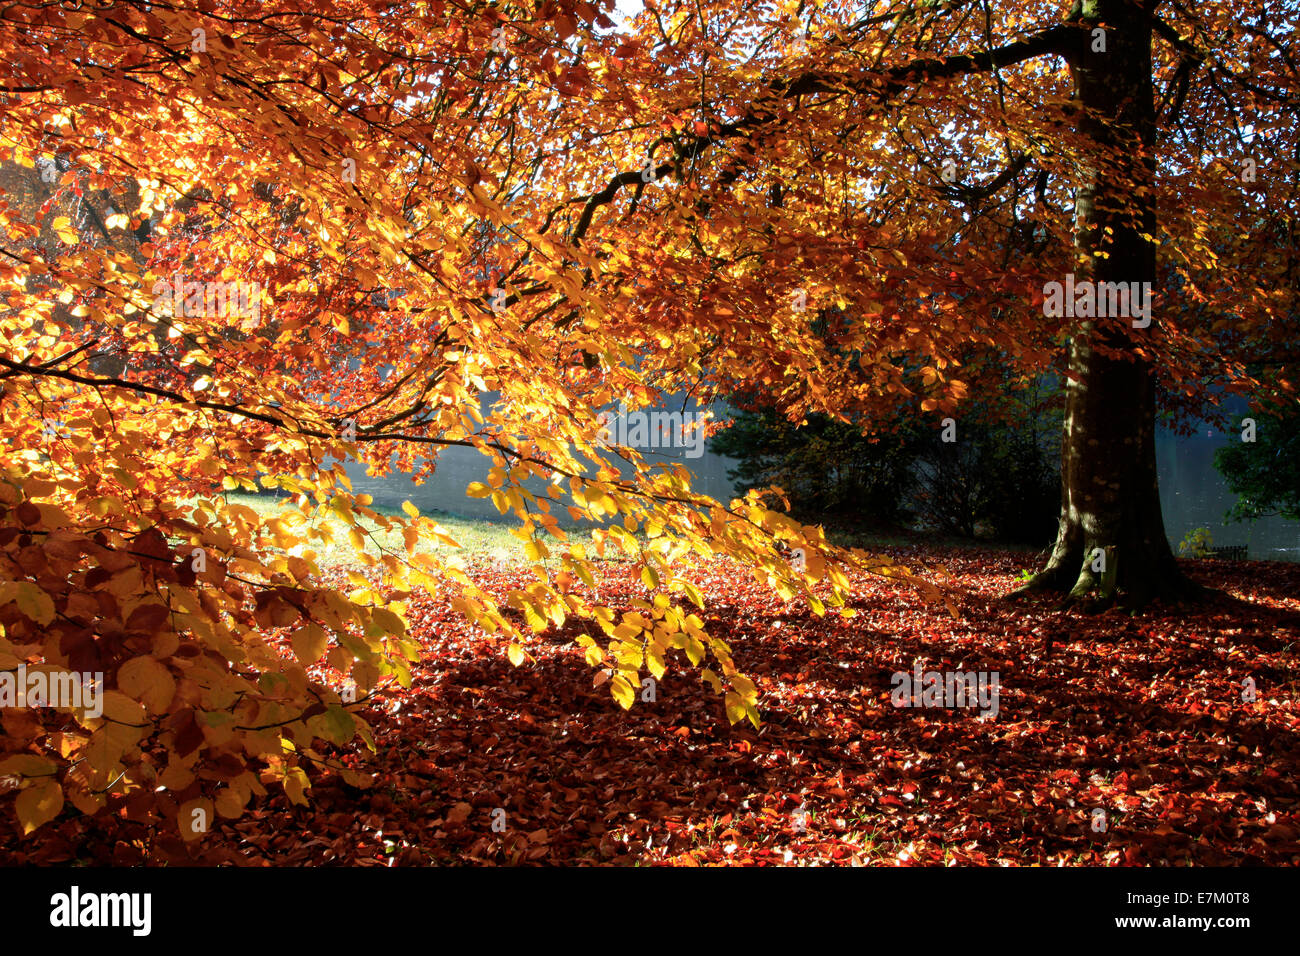 Sunlit beech leaves beside the lake at Shearwater, near Warminster in Wiltshire, England. Stock Photo